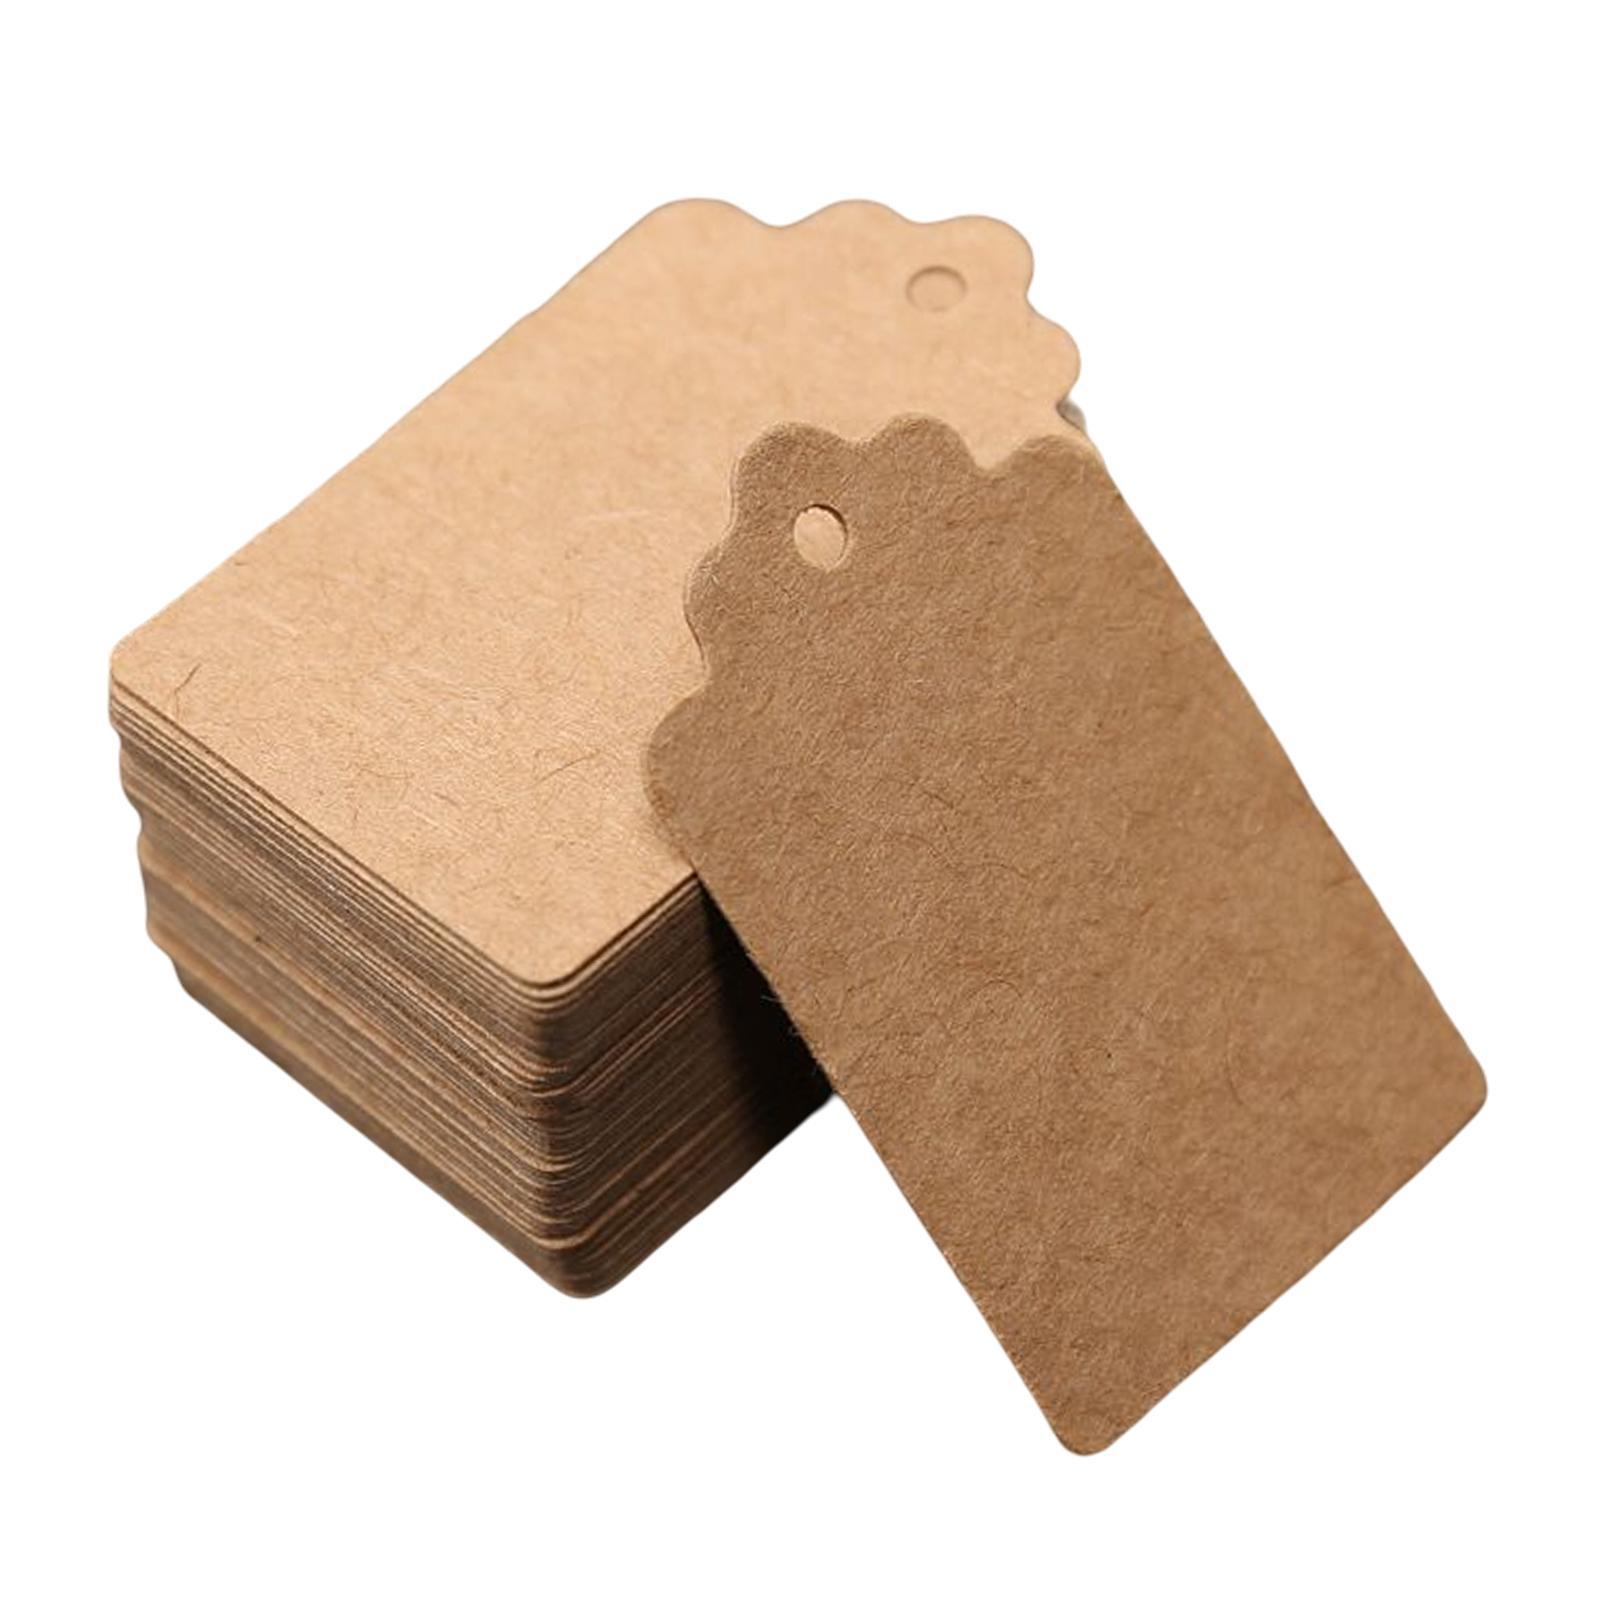 100Pieces Paper Tags Multipurpose Hang Labels for Gift Thanksgiving Wedding